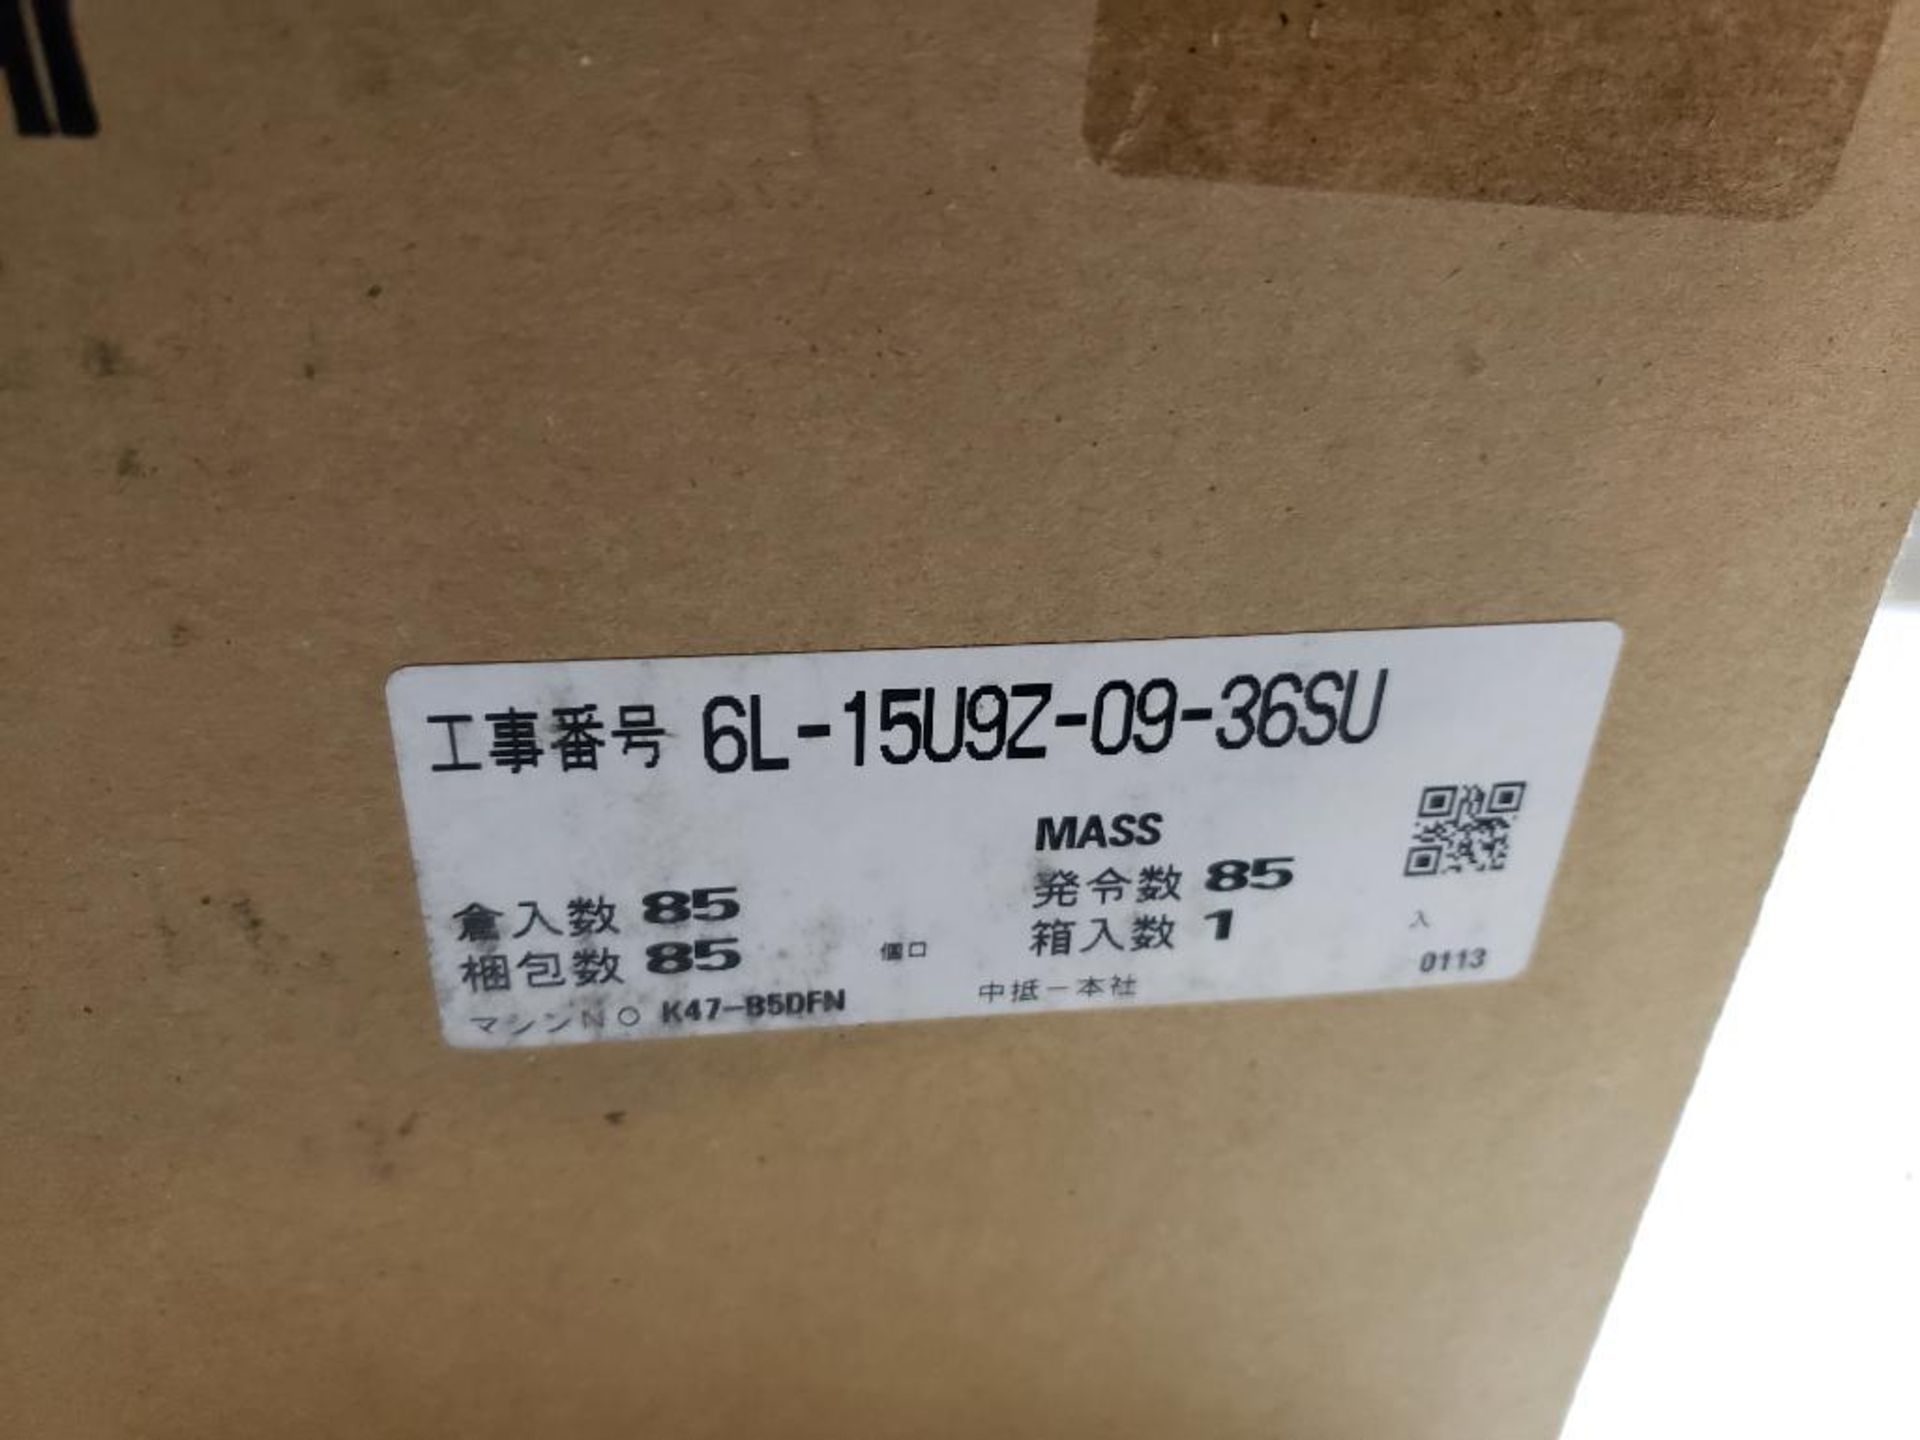 Mitsubishi inverter drive. Part number FR-D740-080-N7. New in box. - Image 4 of 6